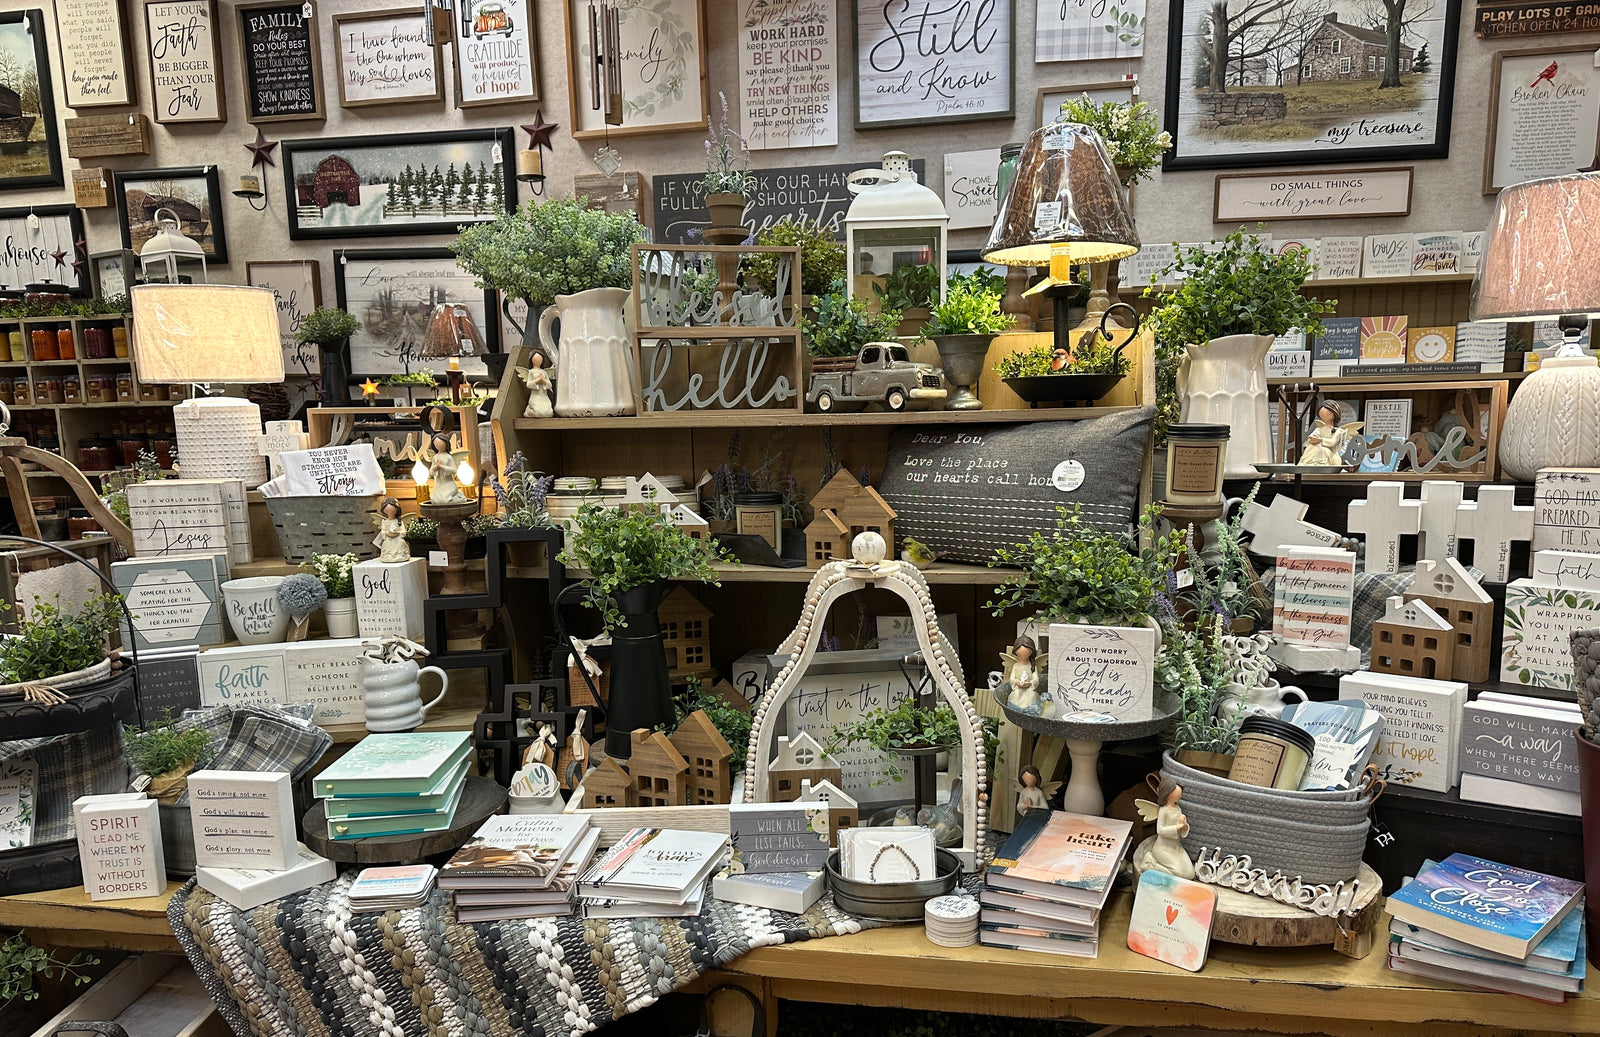 10 Retail Display Ideas to Try in Your Store